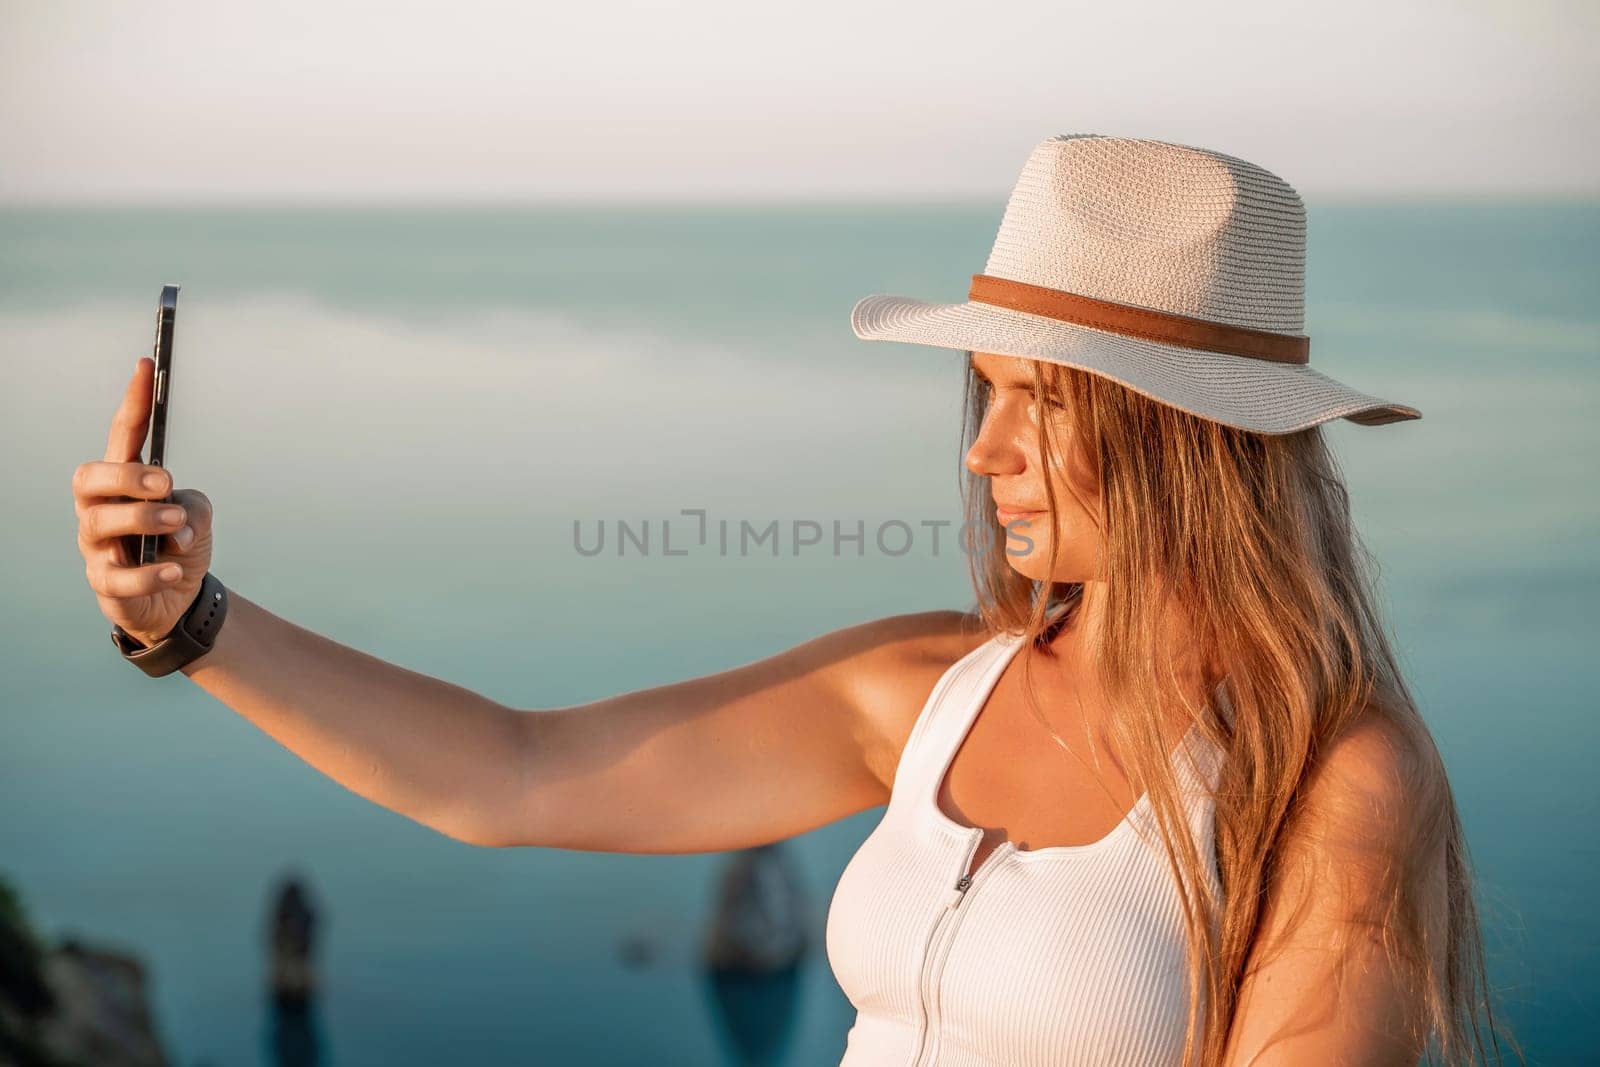 Selfie woman in hat, white tank top and shorts makes selfie shot mobile phone post photo social network outdoors on sea background beach people vacation lifestyle travel concept